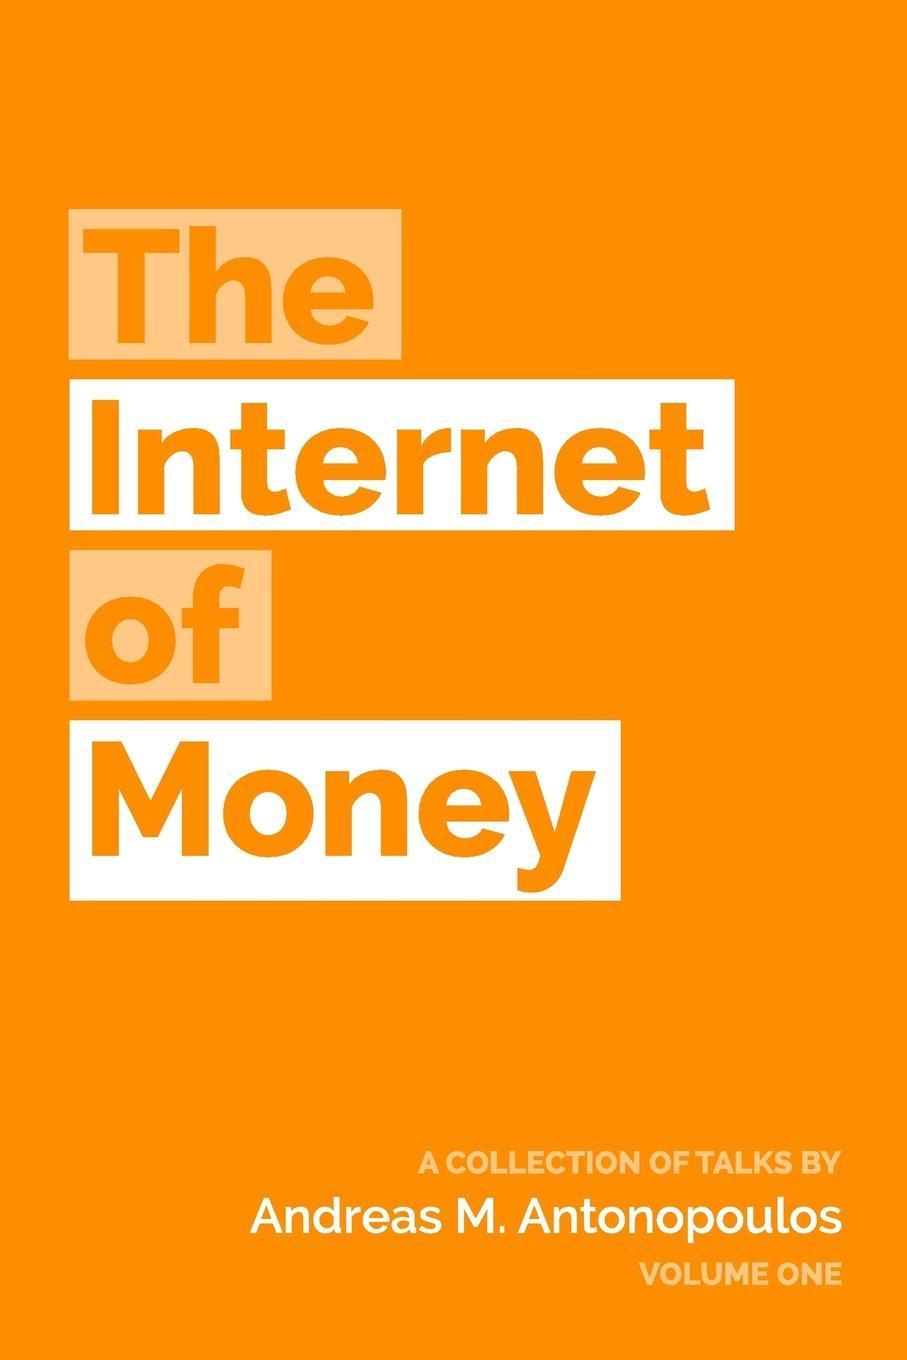 The Internet of Money: by Andreas Antonopoulos